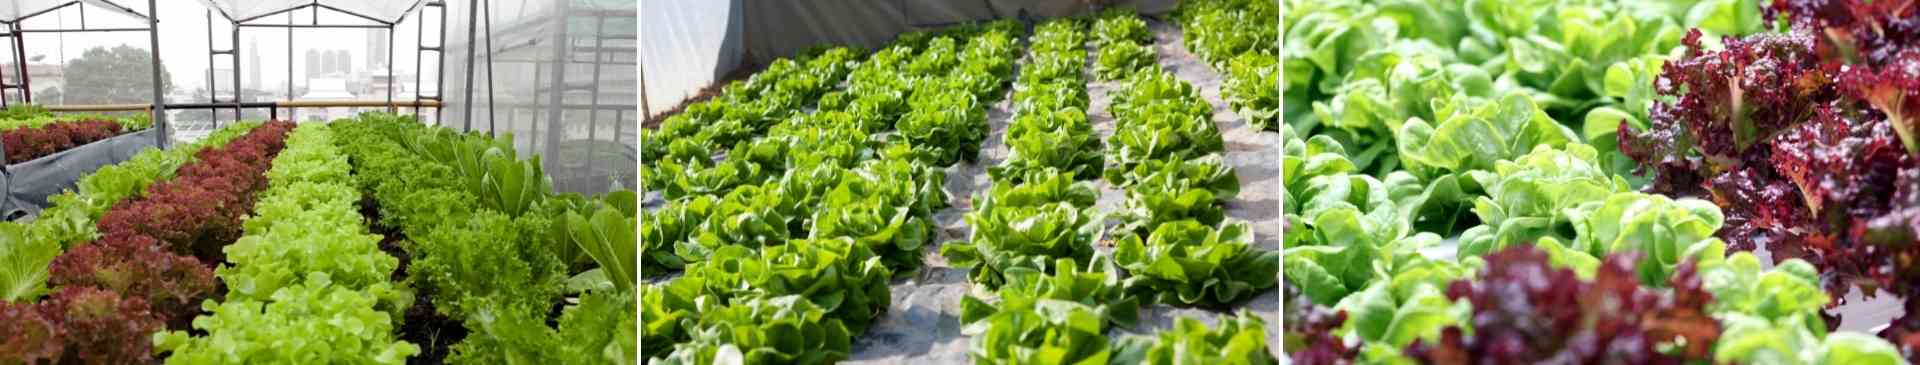 Lettuce- How to grow from seed